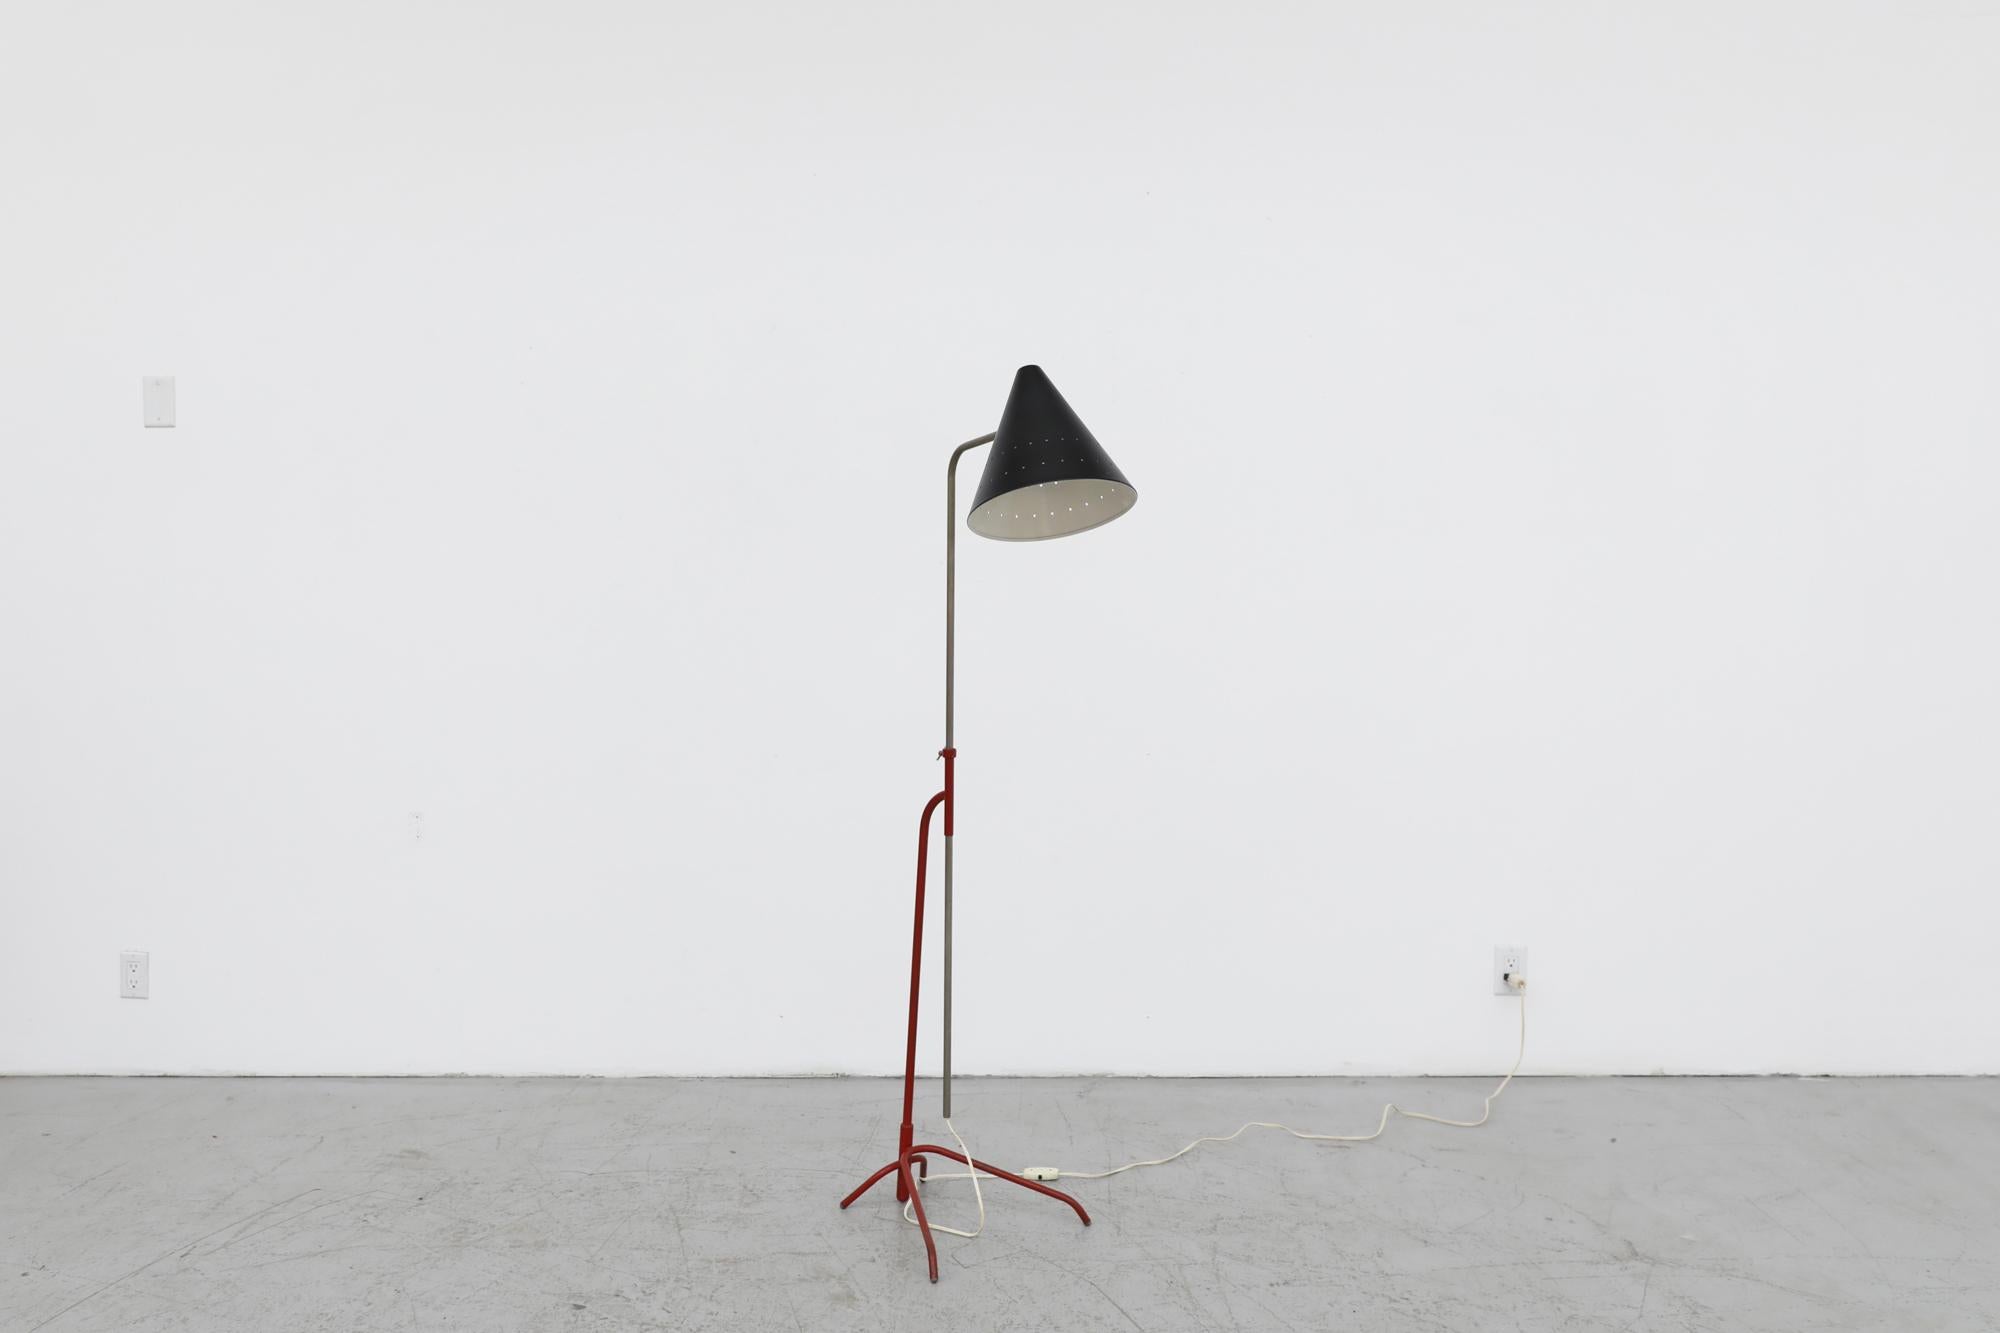 Mid-Century floor lamp with red base, black enameled cone shade and adjustable stem. This lamp is similar in design of the famed Pinocchio Floor Lamp by Hala Zeist. In original condition with visible wear consistent with its age and use. Has